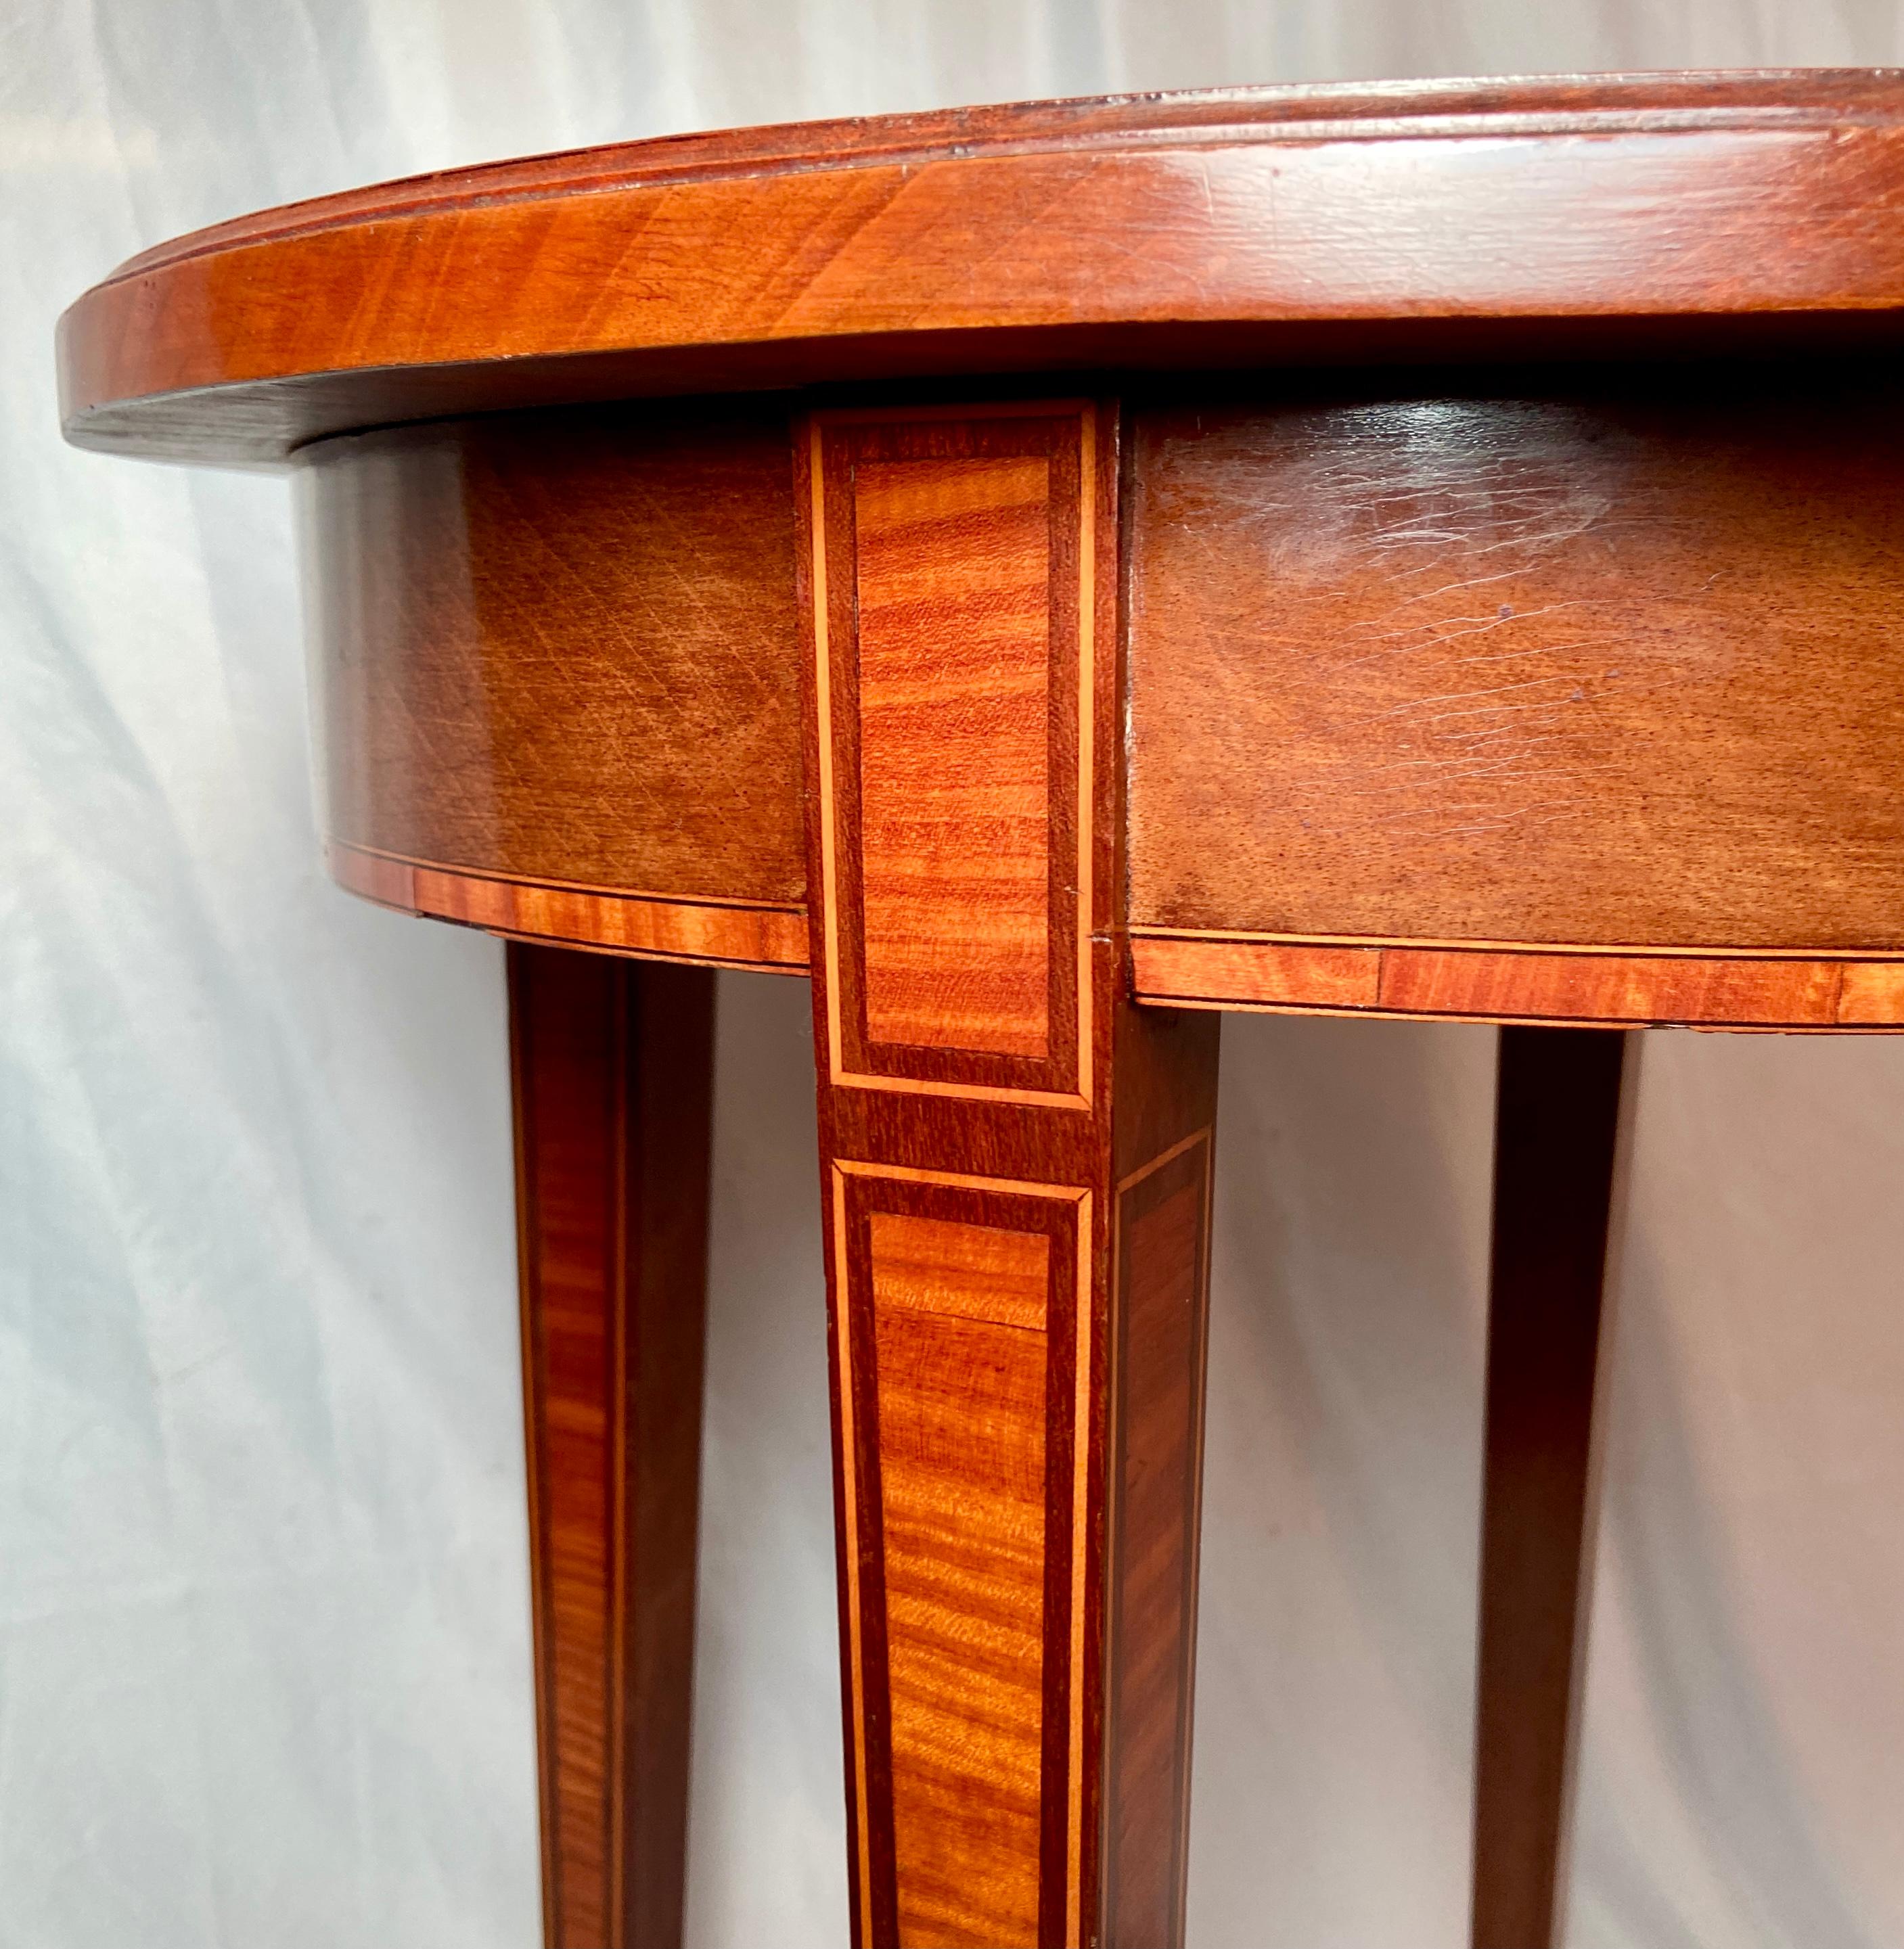 19th Century Antique English Mahogany Table with Satinwood Inlay, Circa 1880-1890 For Sale